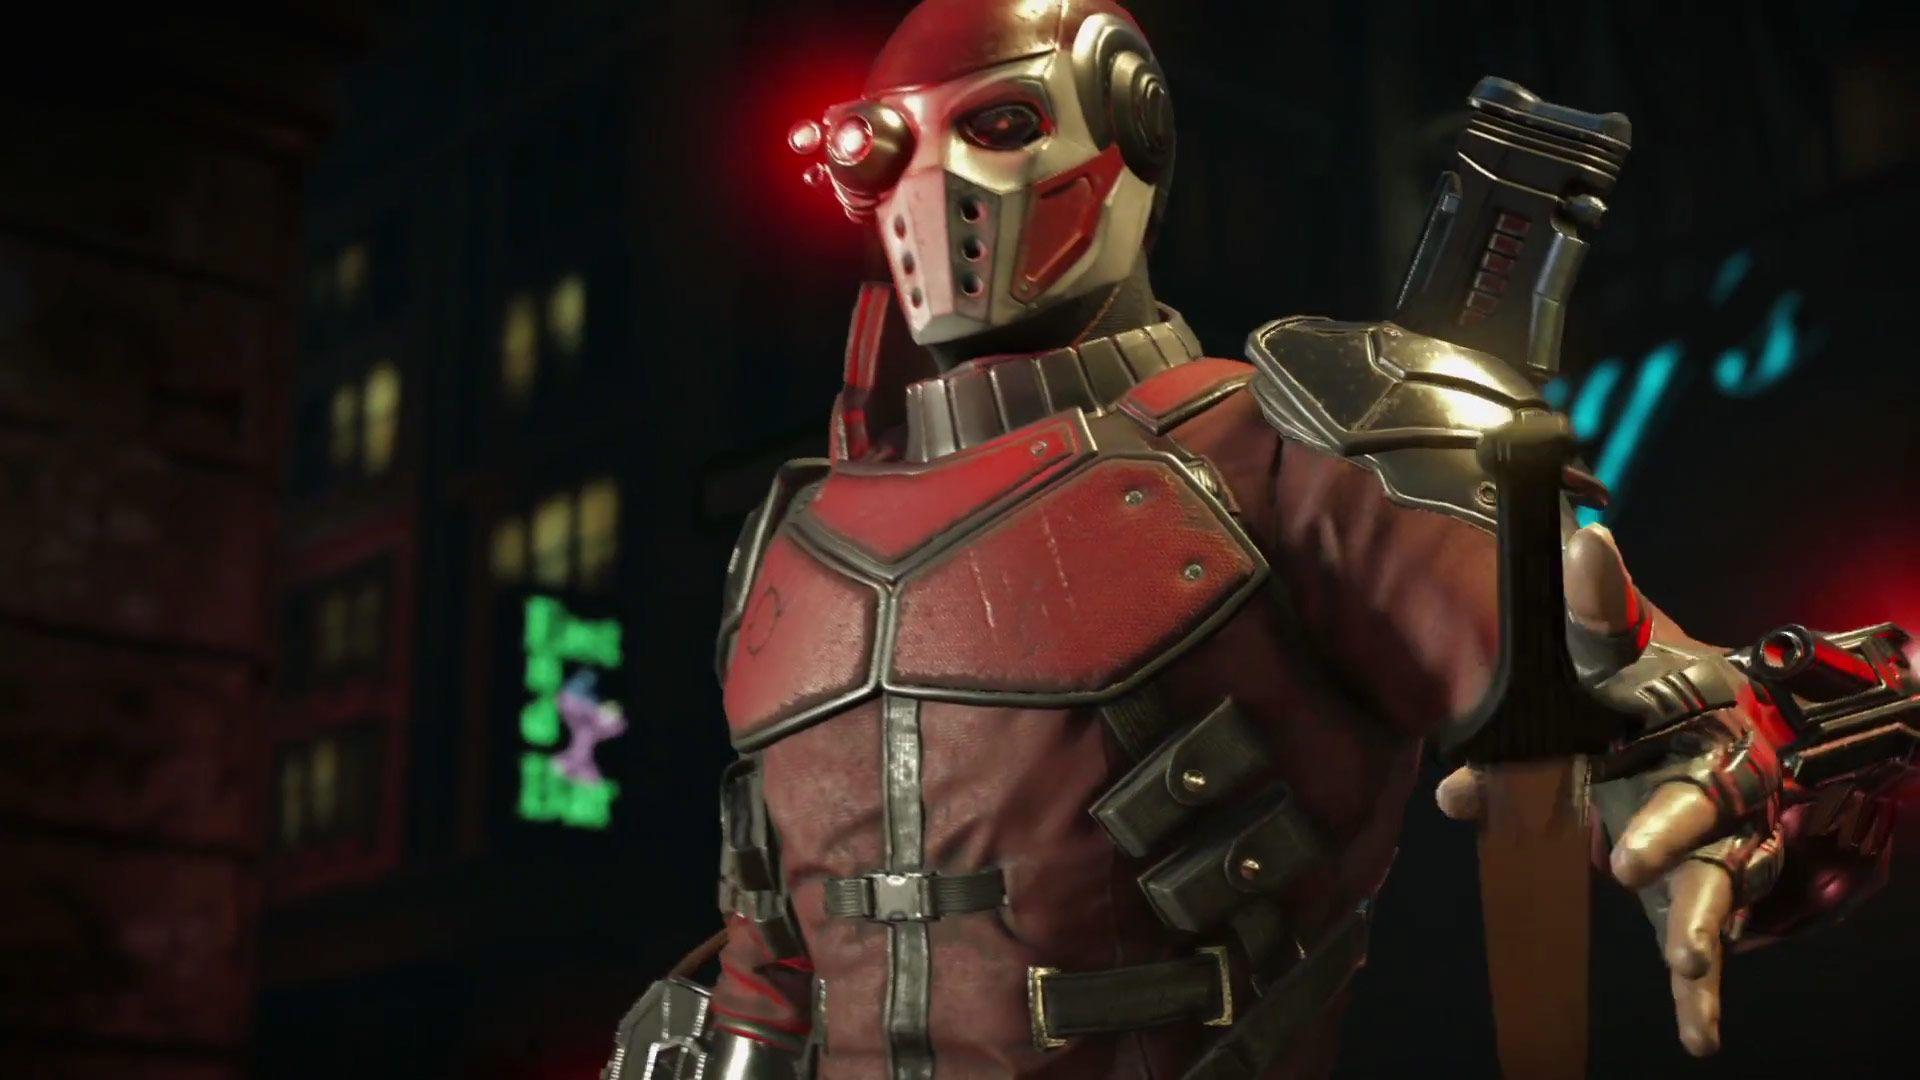 Injustice 2 Harley Quinn and Deadshot Reveal Gallery 4 out of 6